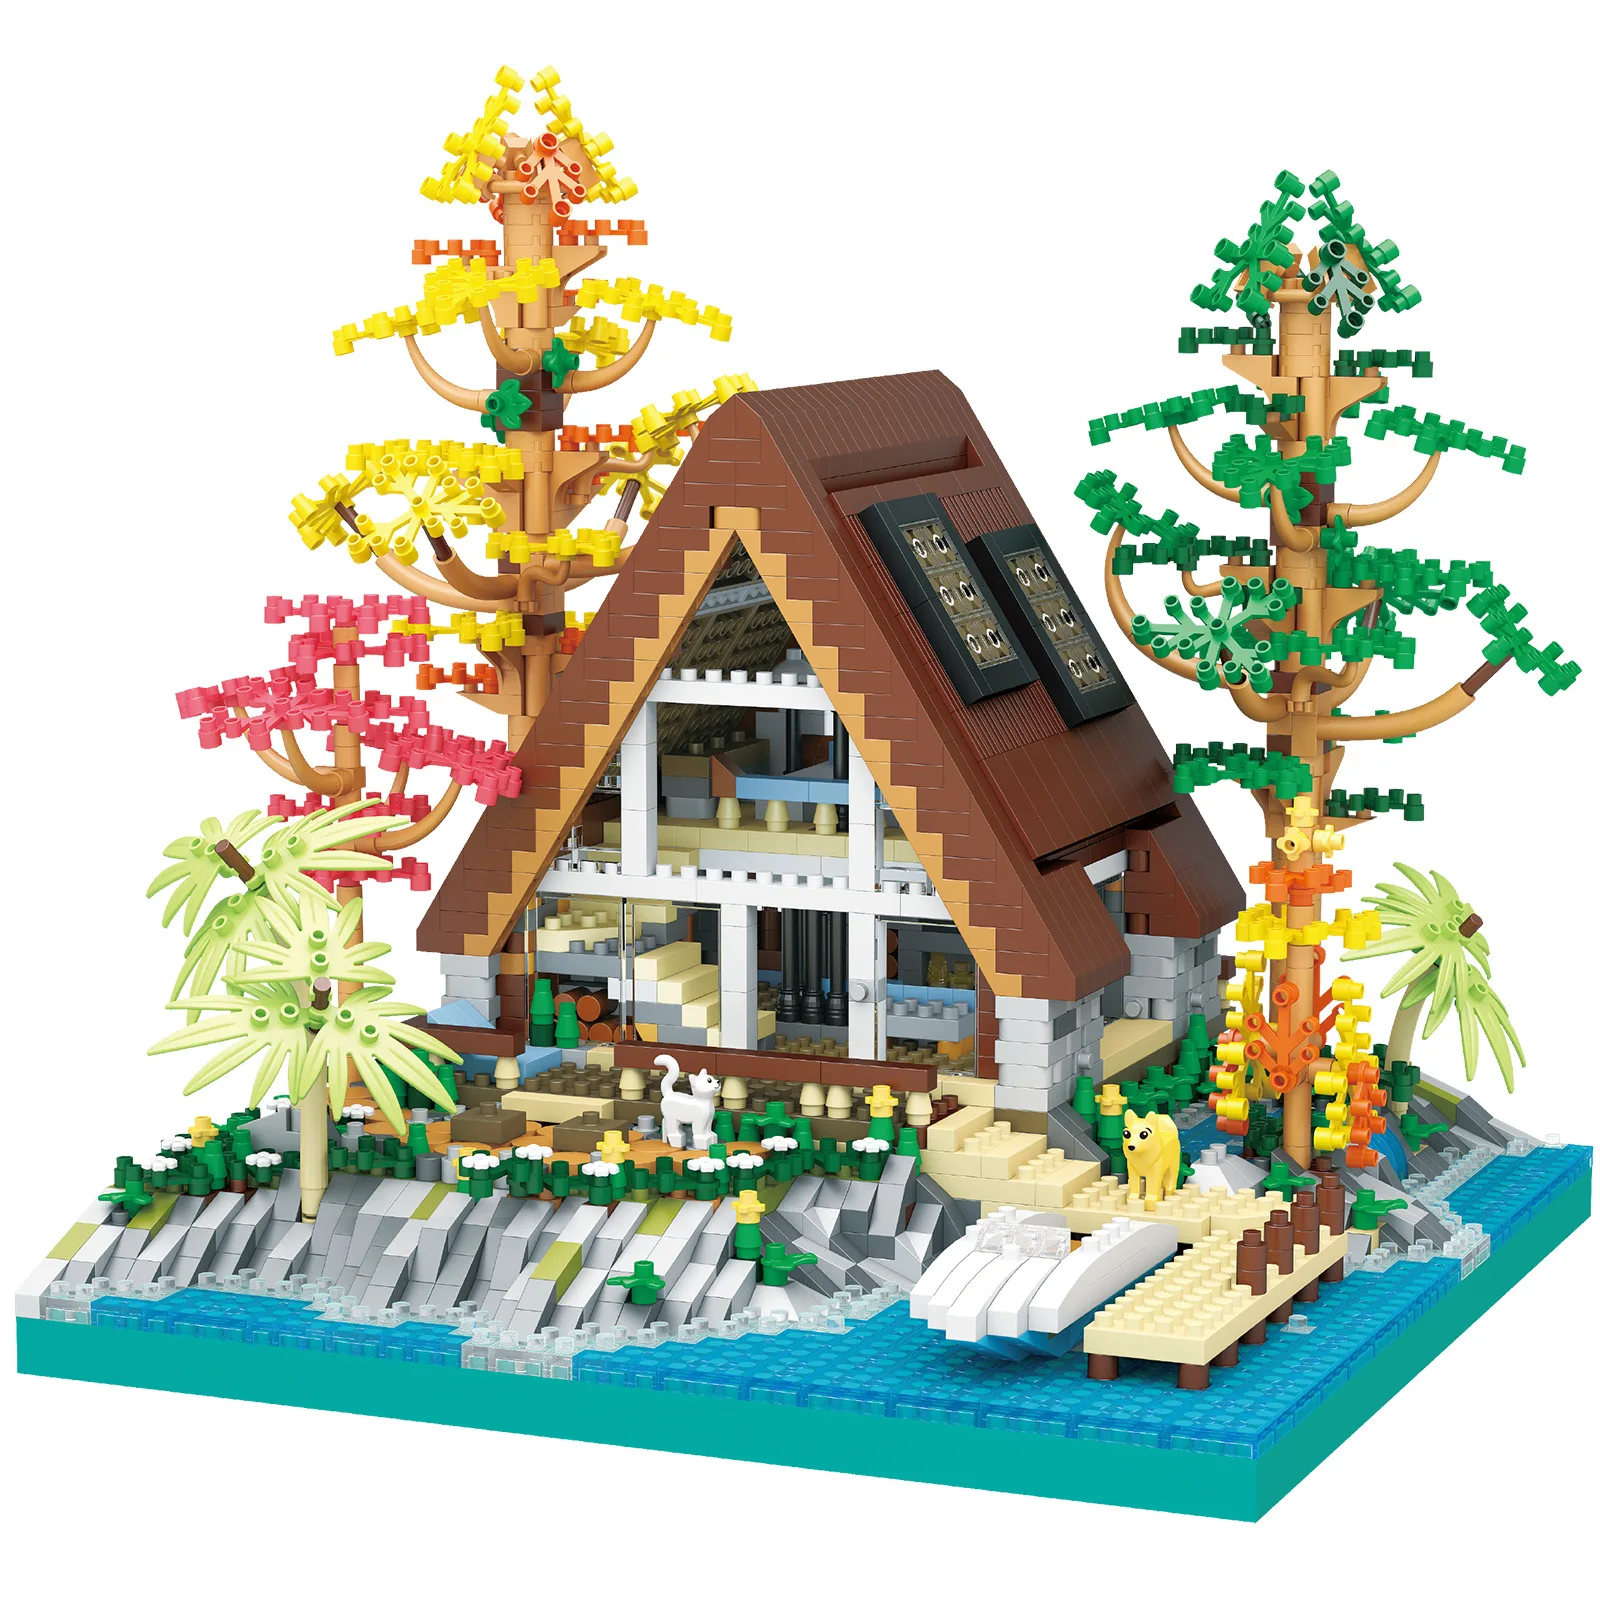 Creative City Street View House Micro Diamond Block Lakeside Cabin Streetscape Model Building Brick Figures Toy For Kids Gifts creative city street view house micro diamond block lakeside cabin streetscape model building brick figures toy for kids gifts